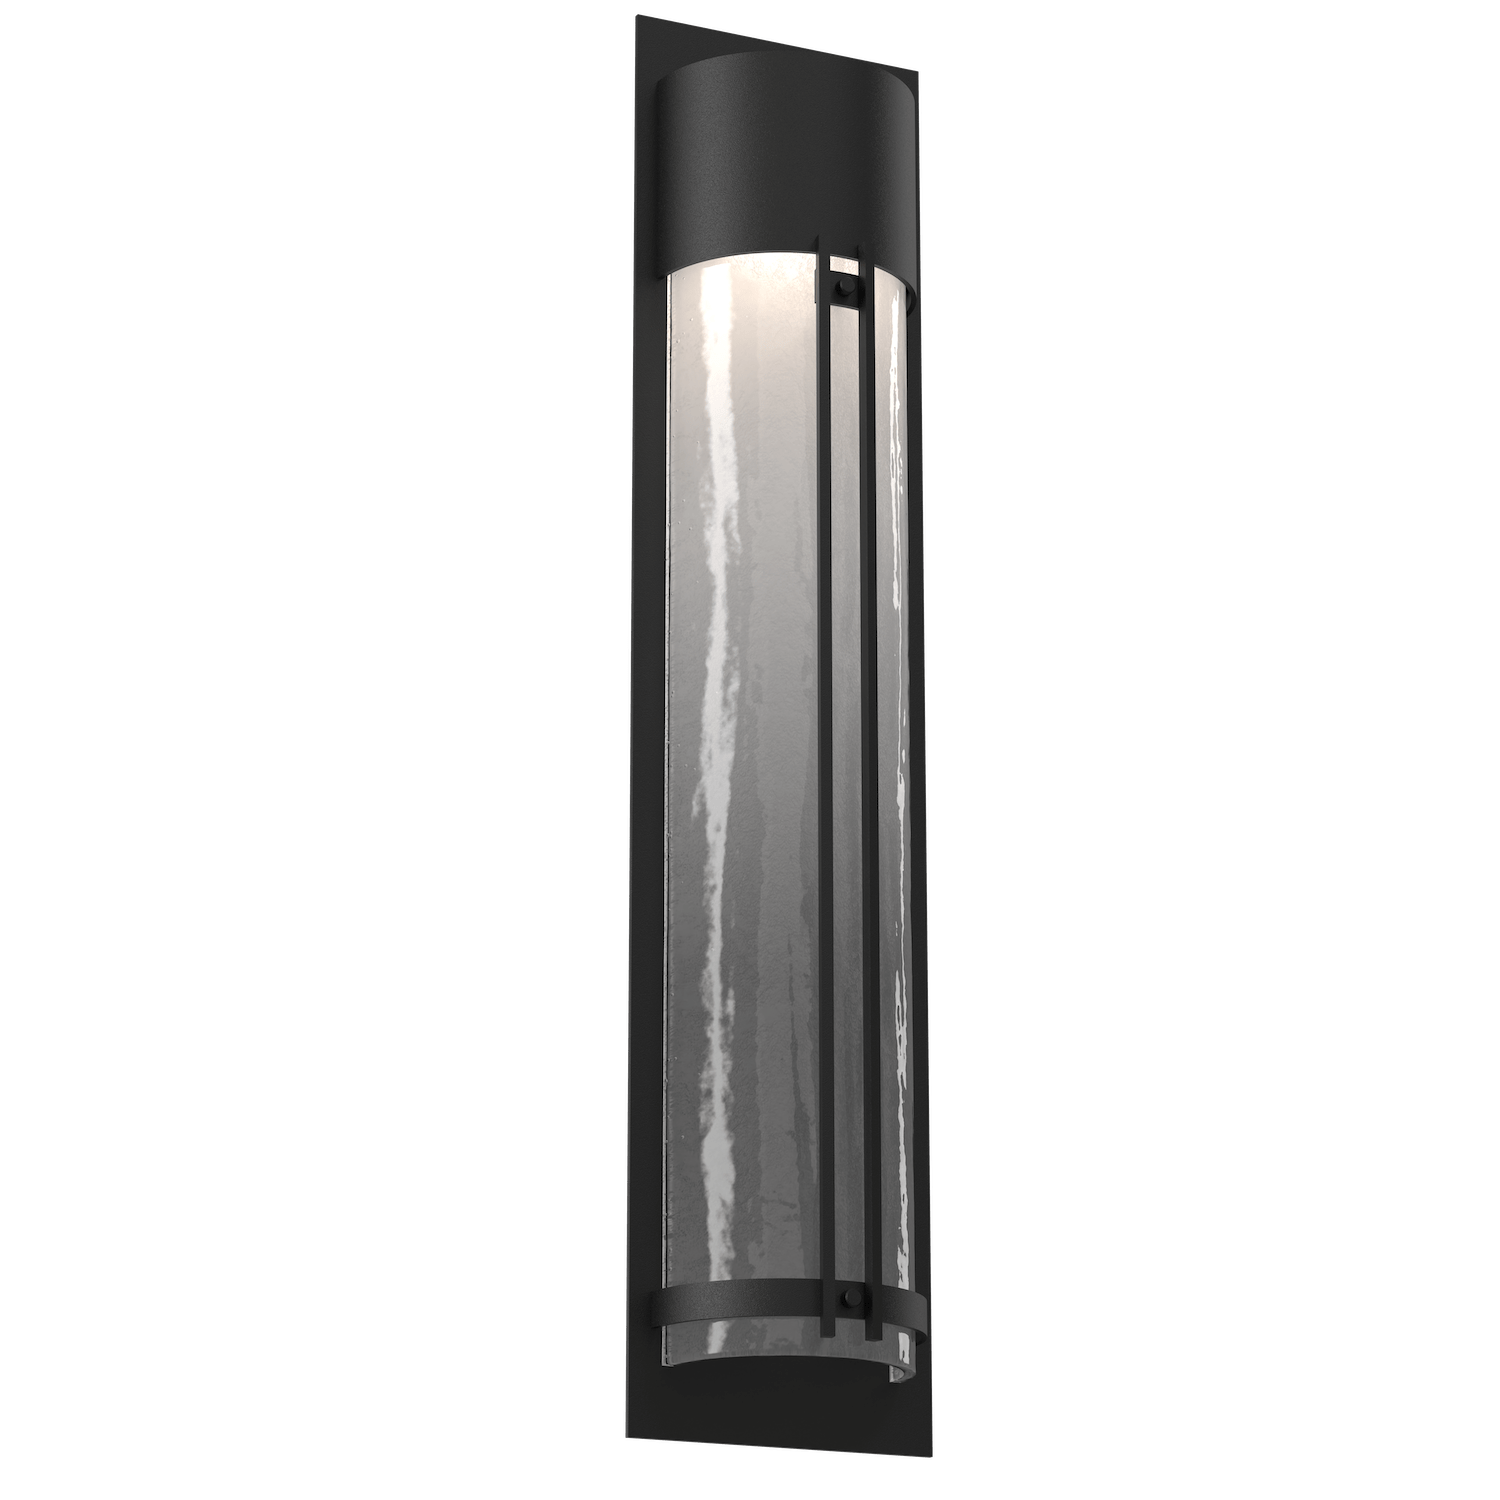 Hammerton Studio Half Round Cover LED Sconce Outdoor l Wall Hammerton Studio 31 Textured Black (Outdoor) Frosted Granite